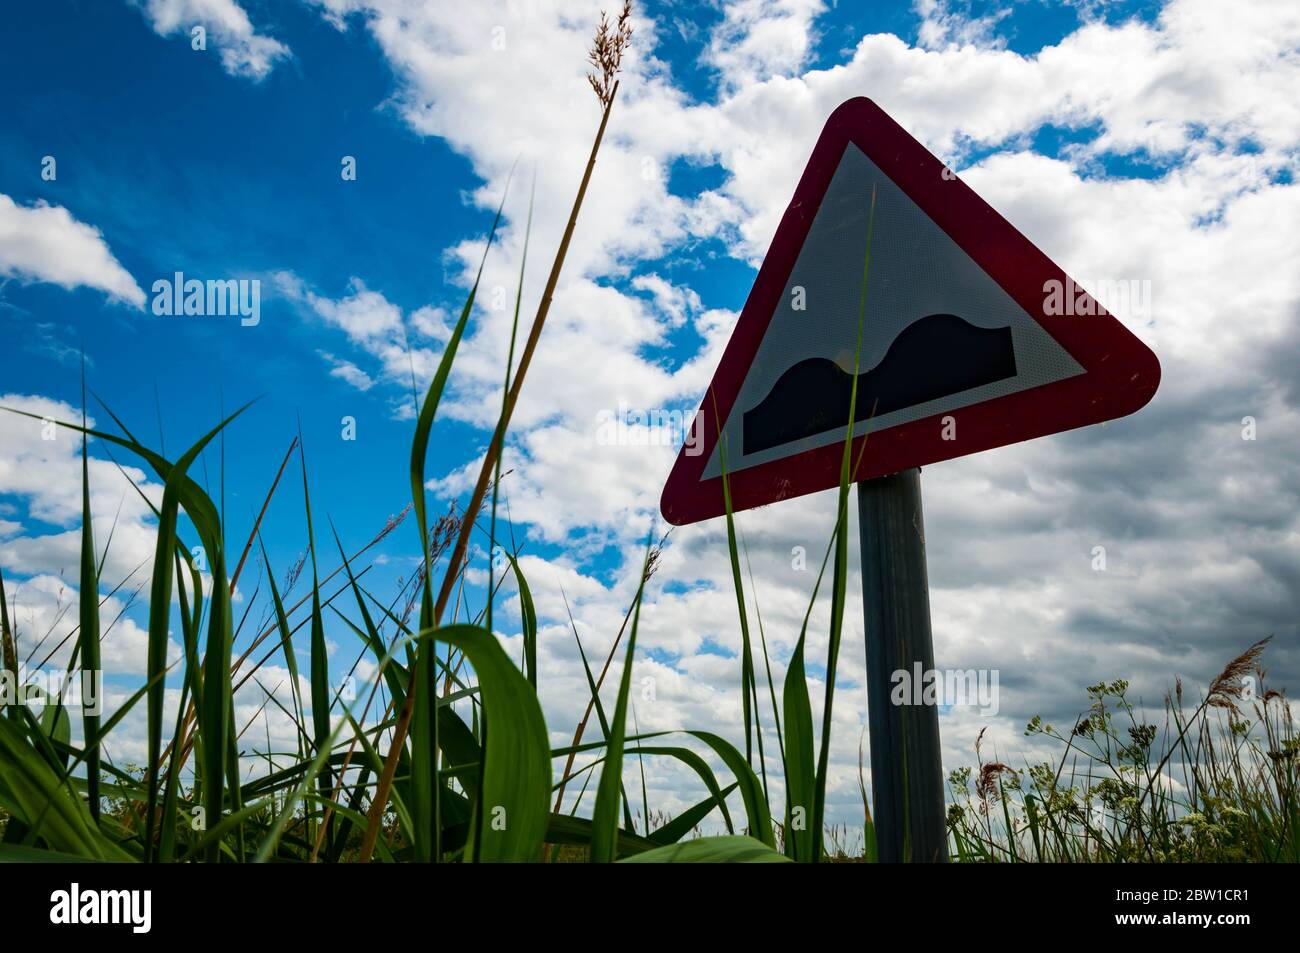 Bumpy road ahead sign in tall grass and bright clouds and blue sky in background Stock Photo